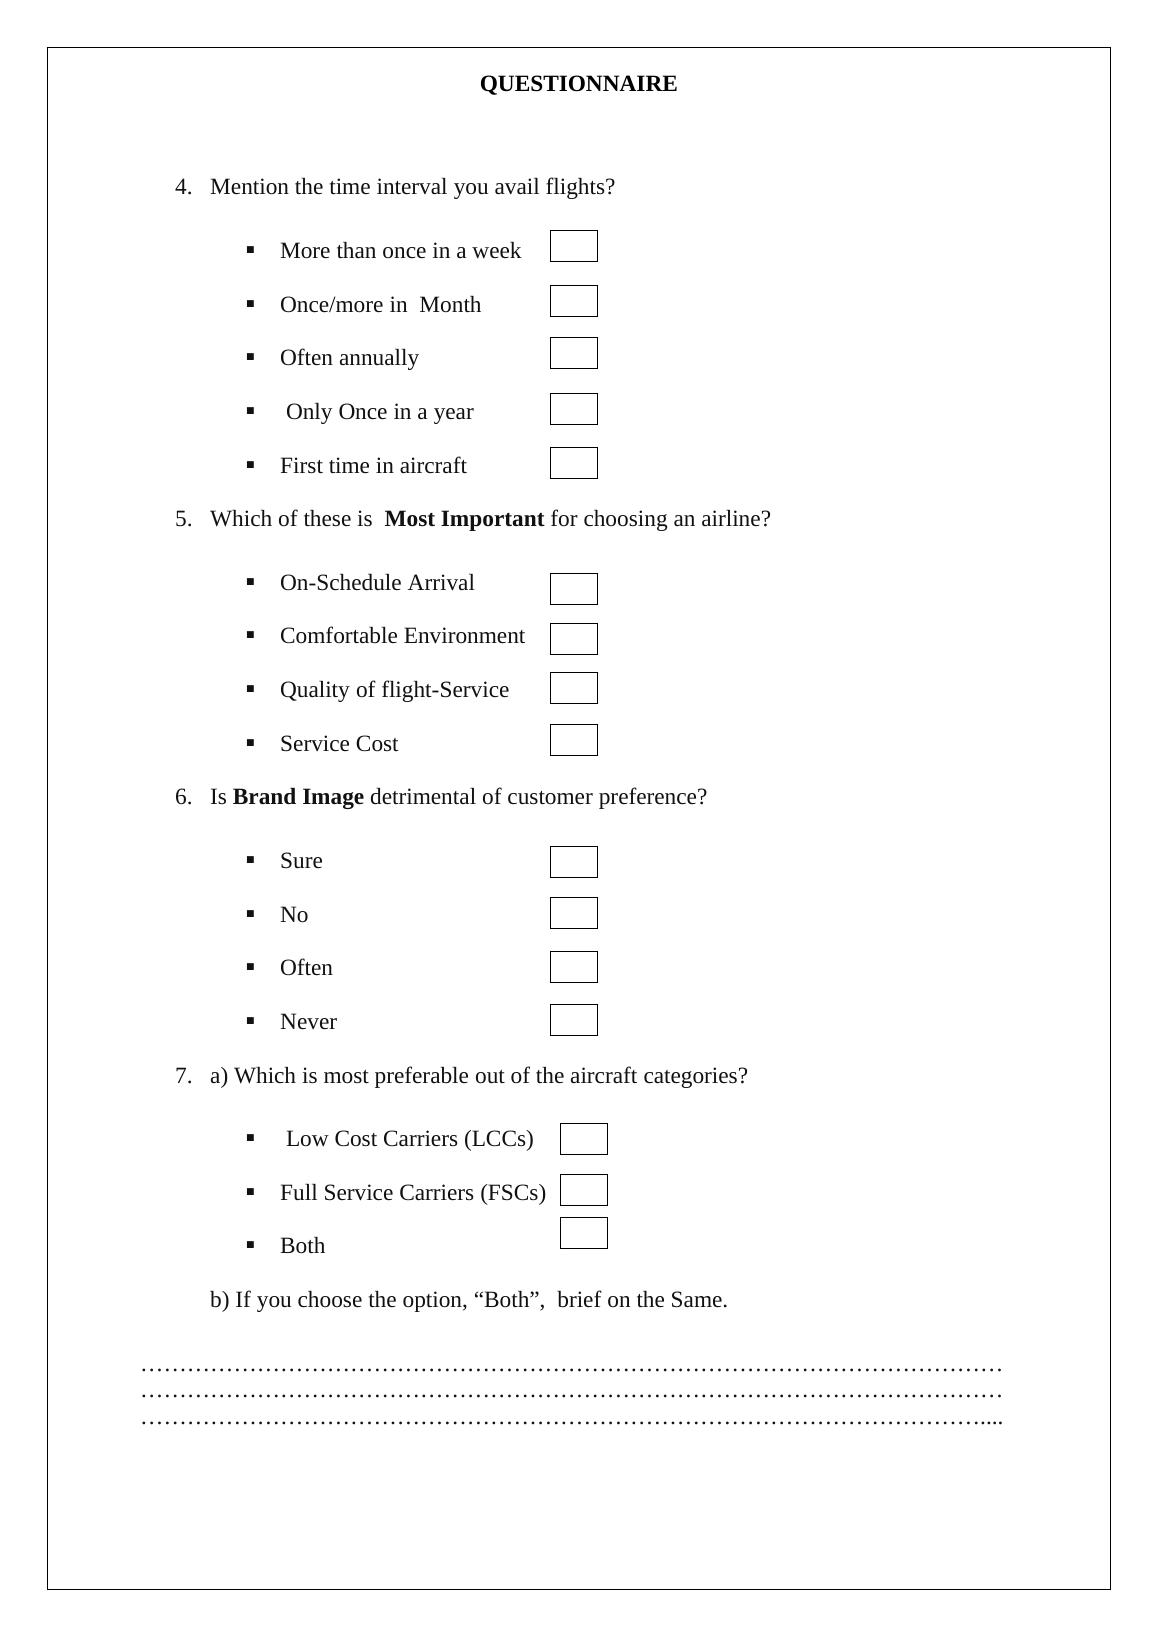 Questionnaire-Survey to identify for FSCs and LCCs Customers_2